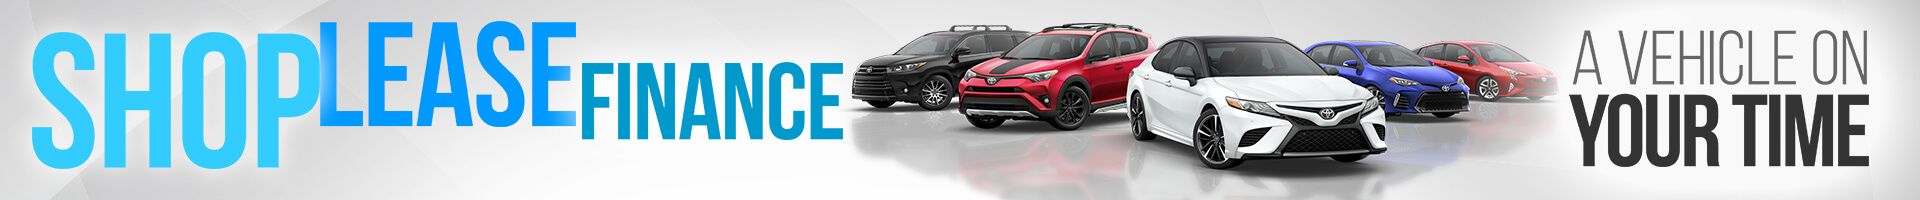 Toyota Buy Online - Imported from fronthero and srpbanners